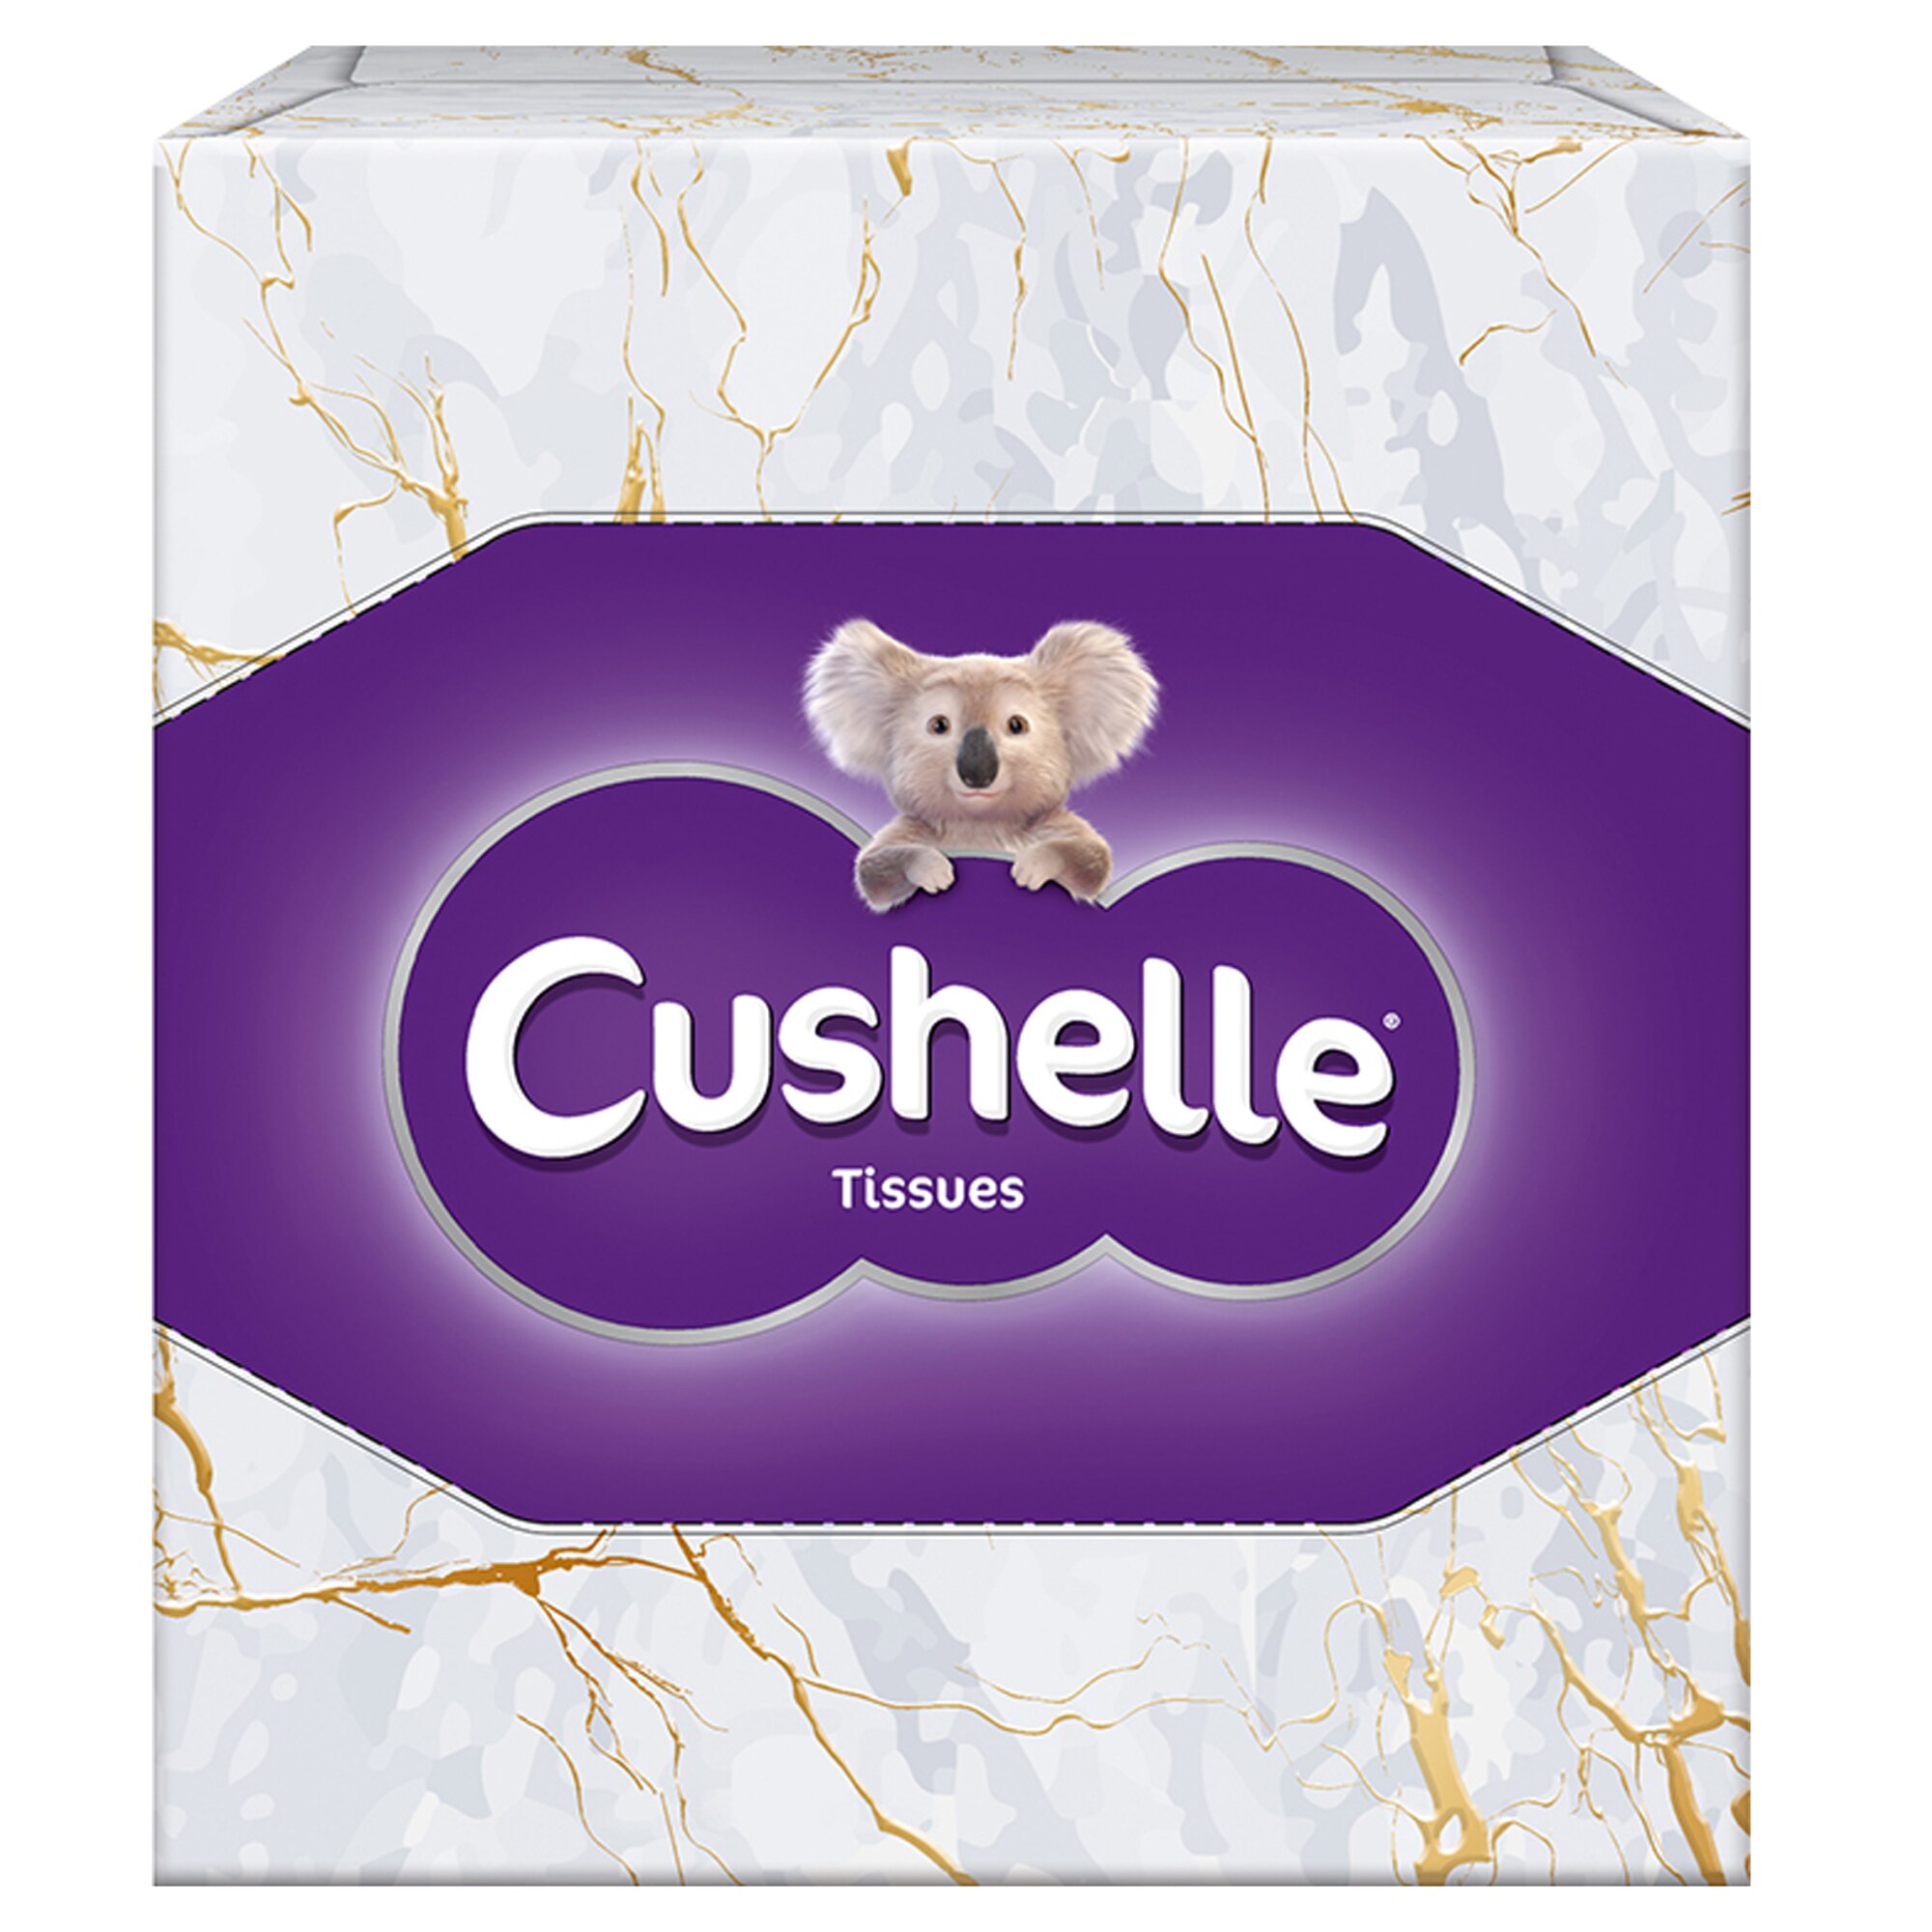 Cushelle Premium Soft Strong Facial Tissues Pack of 6 Boxes x 80 Sheets 